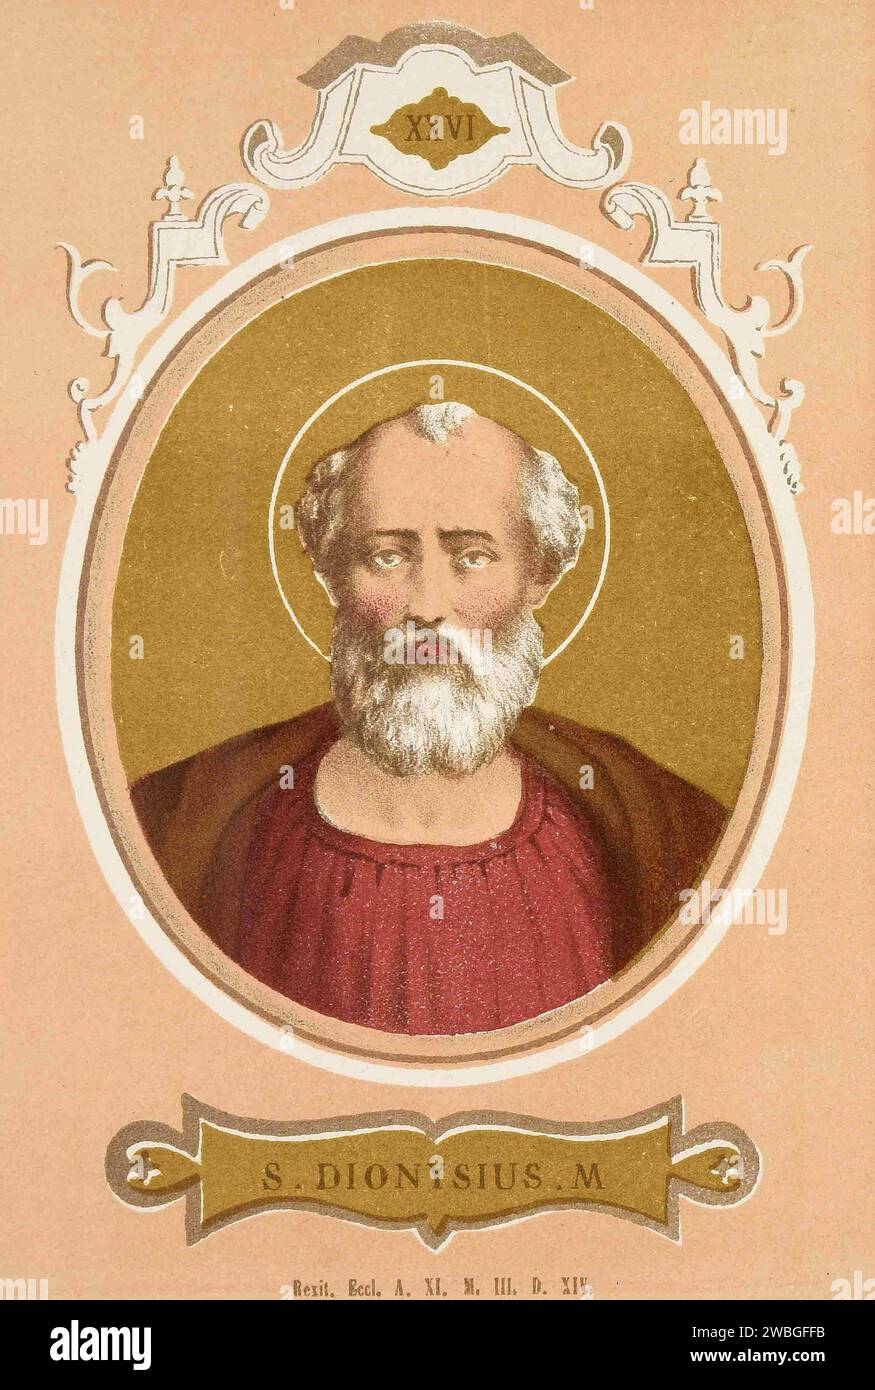 An 1879 engraving of Pope Dionsius who was pontiff from AD259-AD268. He was the 25th pope and was the first pope to hold office in the period of tolerance after the violent persecutions of Emperor Valerian. Stock Photo